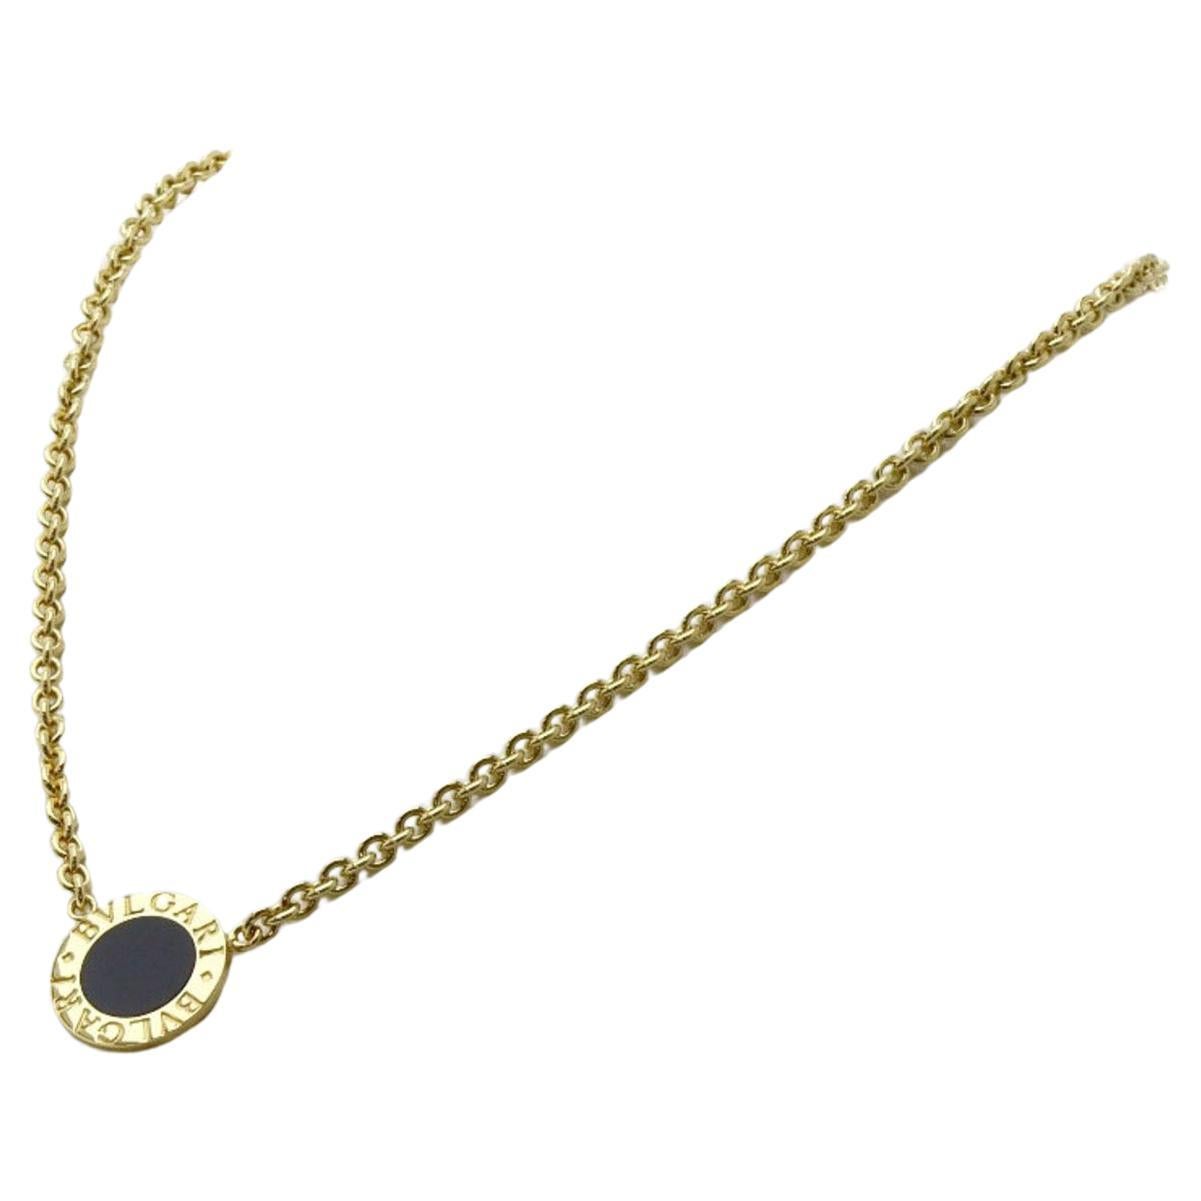 Bvlgari Onyx Necklace in 18K Yellow Gold